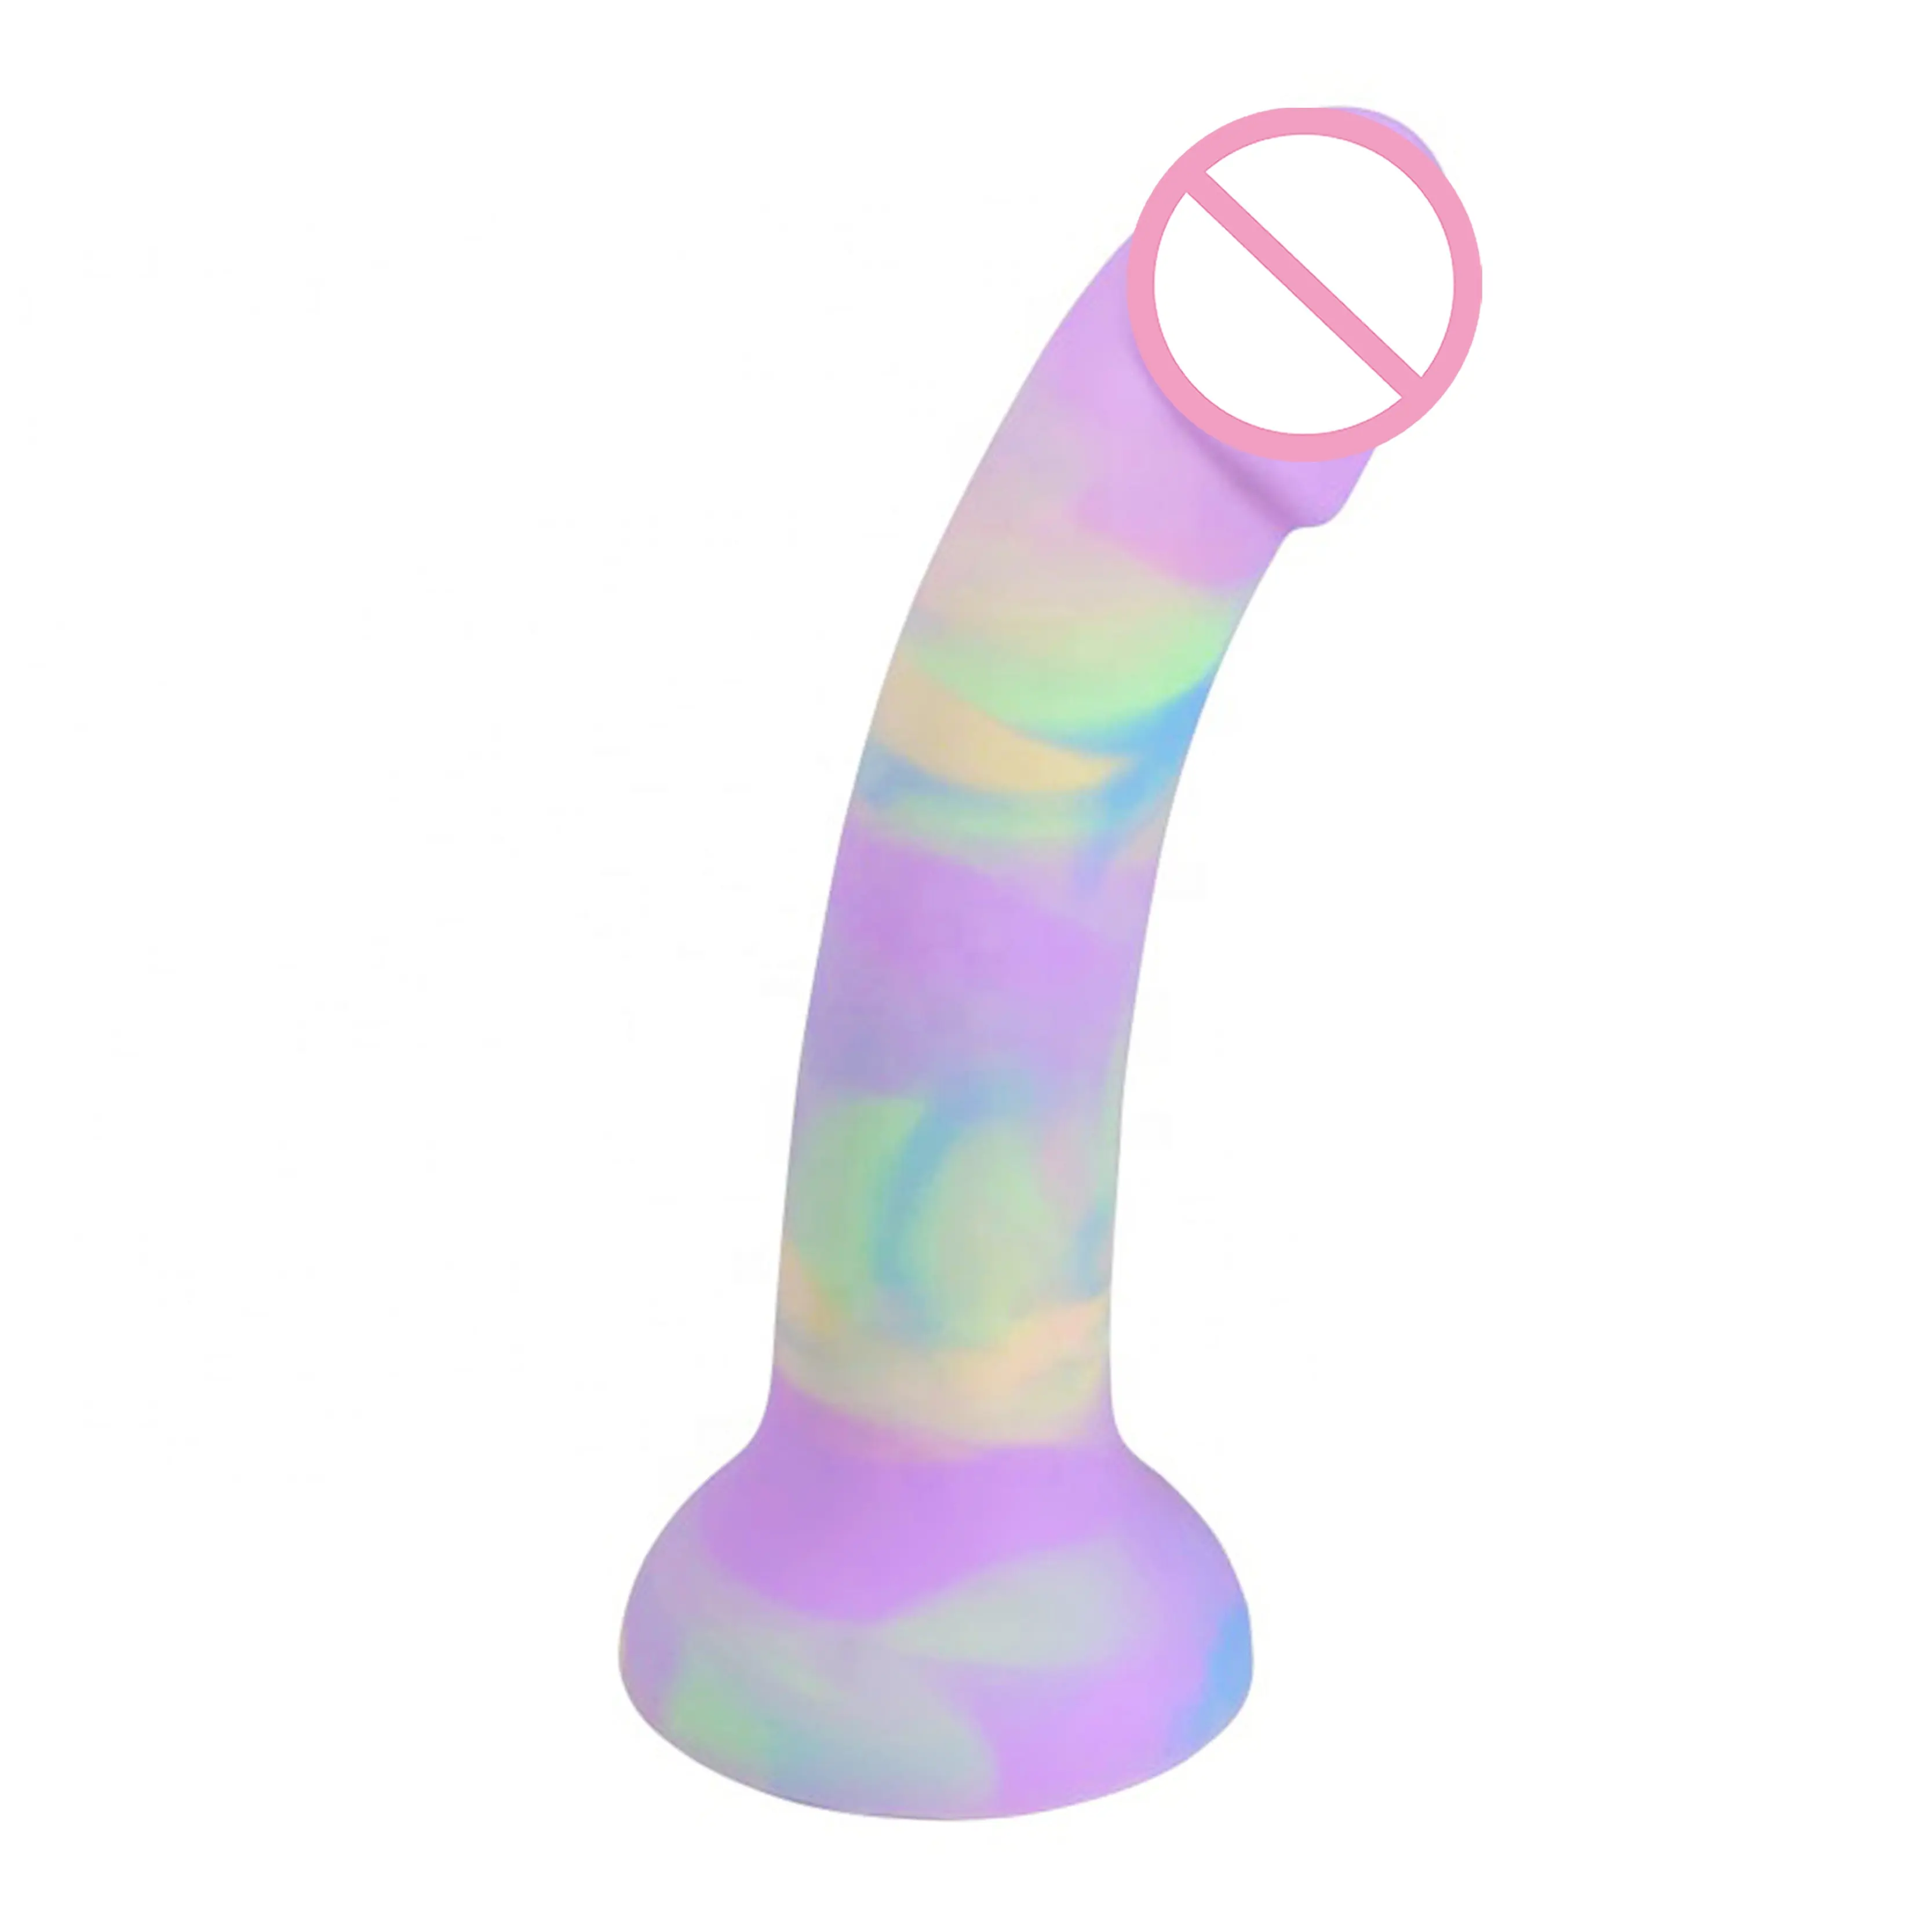 High quality Sweet Cloud Series Silicone Dildos Vagina Masturbation Adult Penis Sex Toys for Women